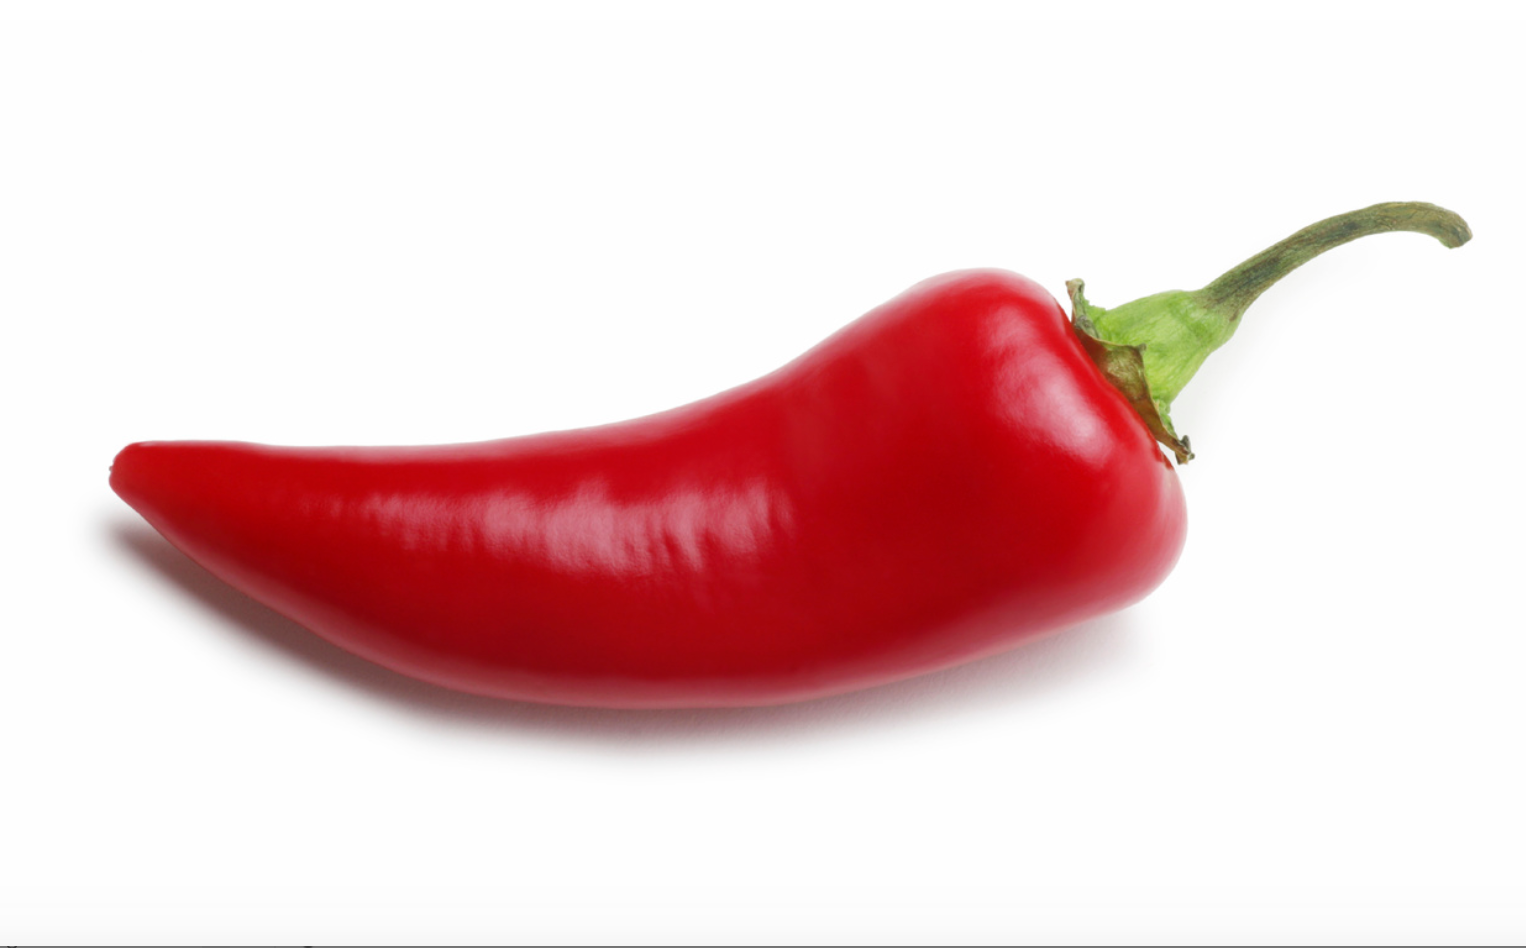 Study: People Who Eat Chili Peppers May Live Longer